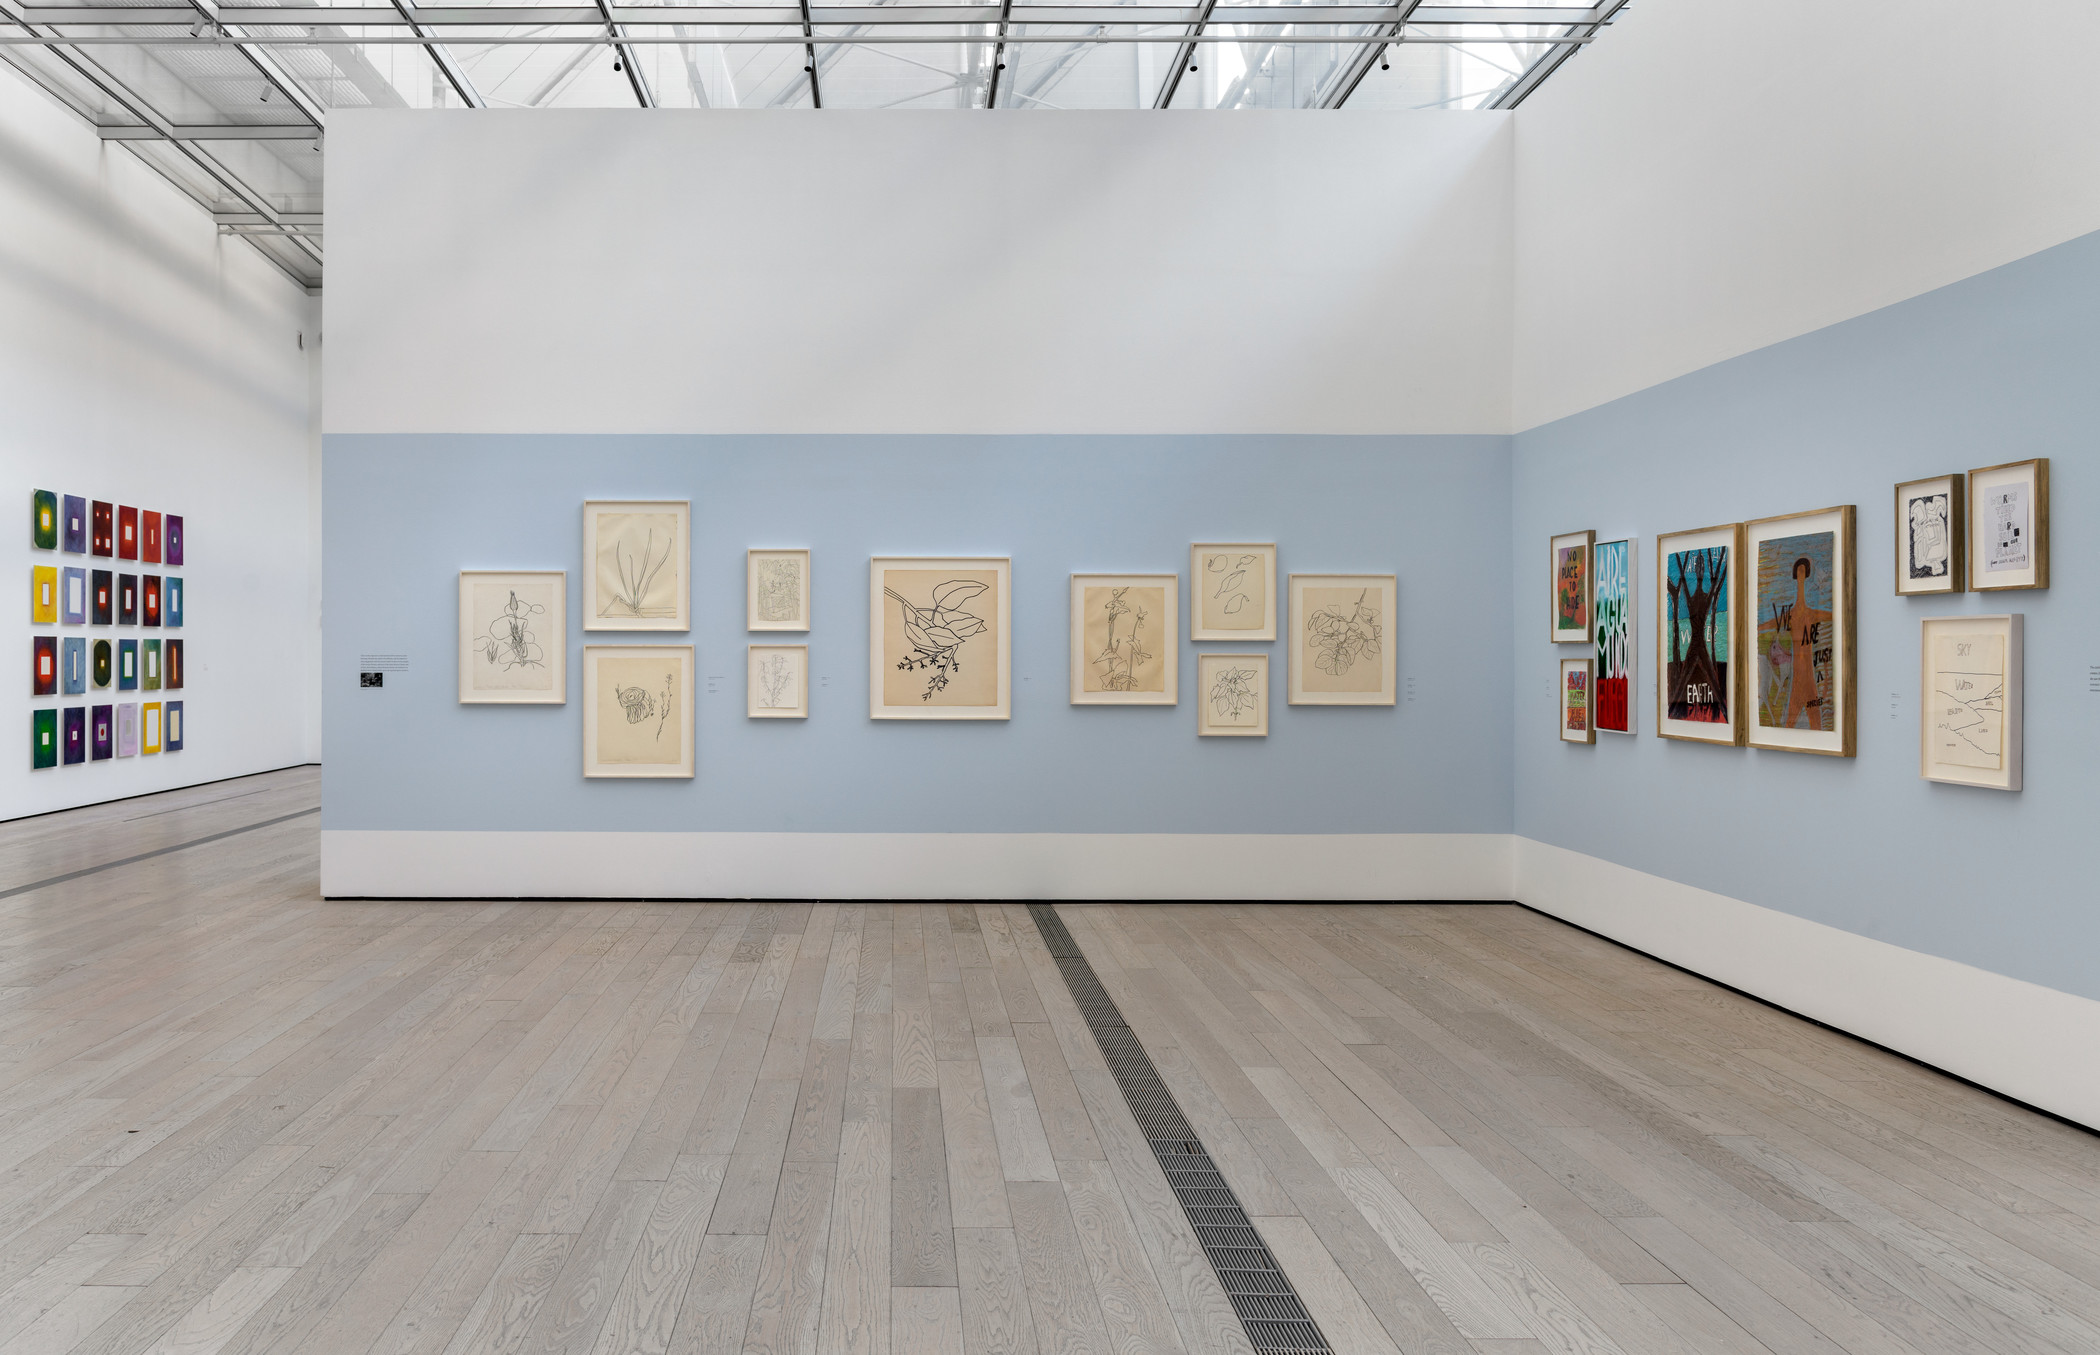 Photos don’t do justice to the experience of seeing these works together in one place. Installation view, Luchita Hurtado: I Live I Die I Will Be Reborn, Los Angeles County Museum of Art, February 15–May 3, 2020, art © Luchita Hurtado, photo © Museum Associates/LACMA 